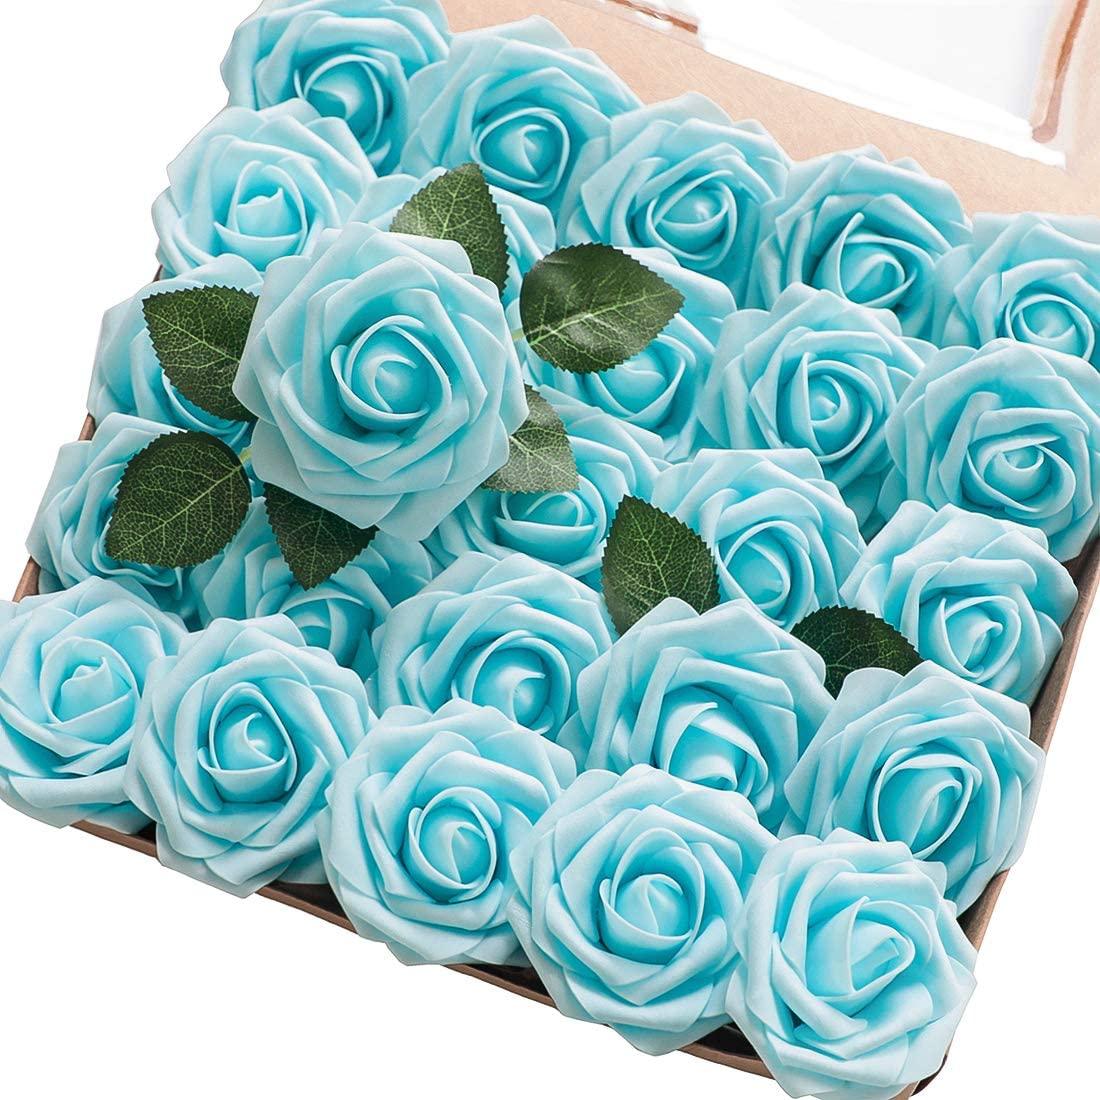 Artificial Flowers Real Looking Aqua Blue Foam Fake Roses with Stems for DIY Wedding Bouquets - Decotree.co Online Shop